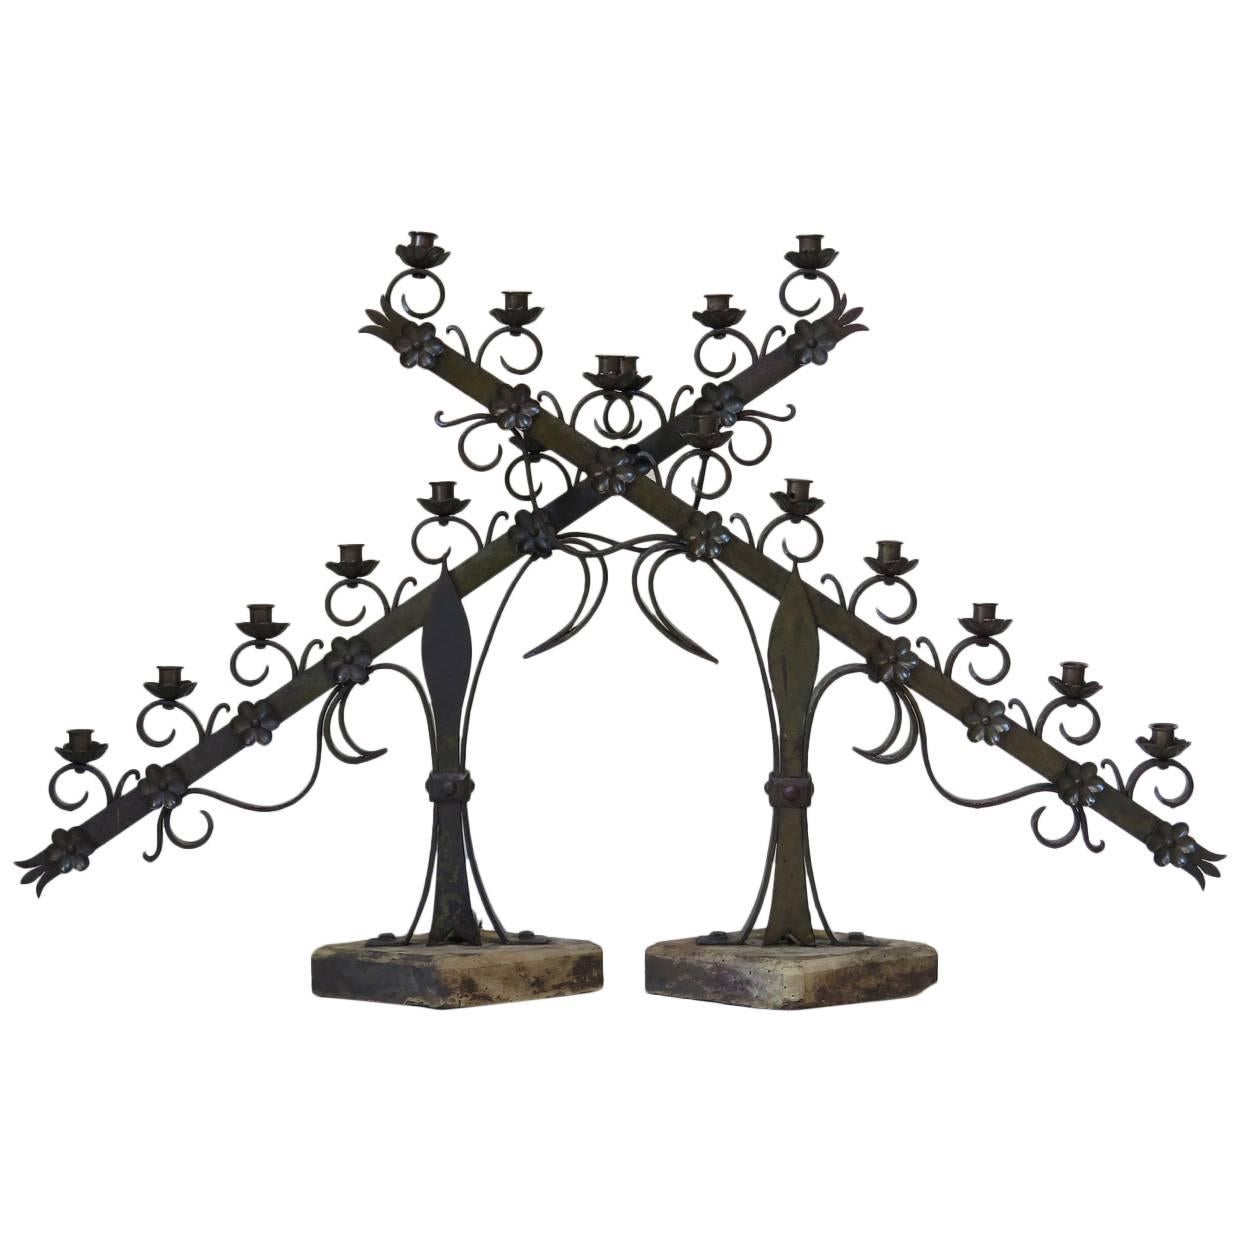 Large Pair of Ecclesiastical Iron Candleholders, France, Early 20th Century